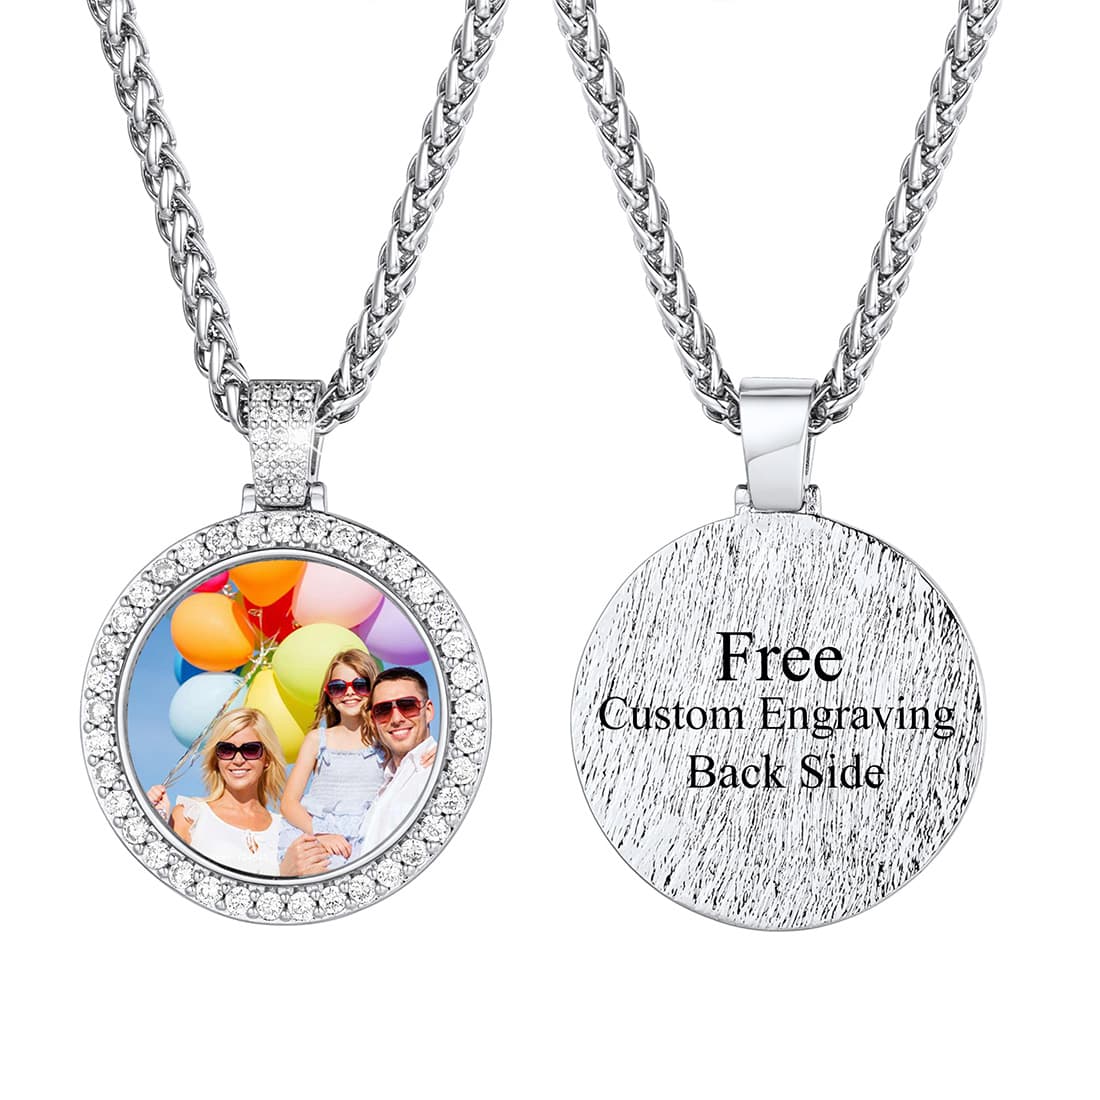 Customized Photo Necklaces Cubic Zirconia Picture Necklace